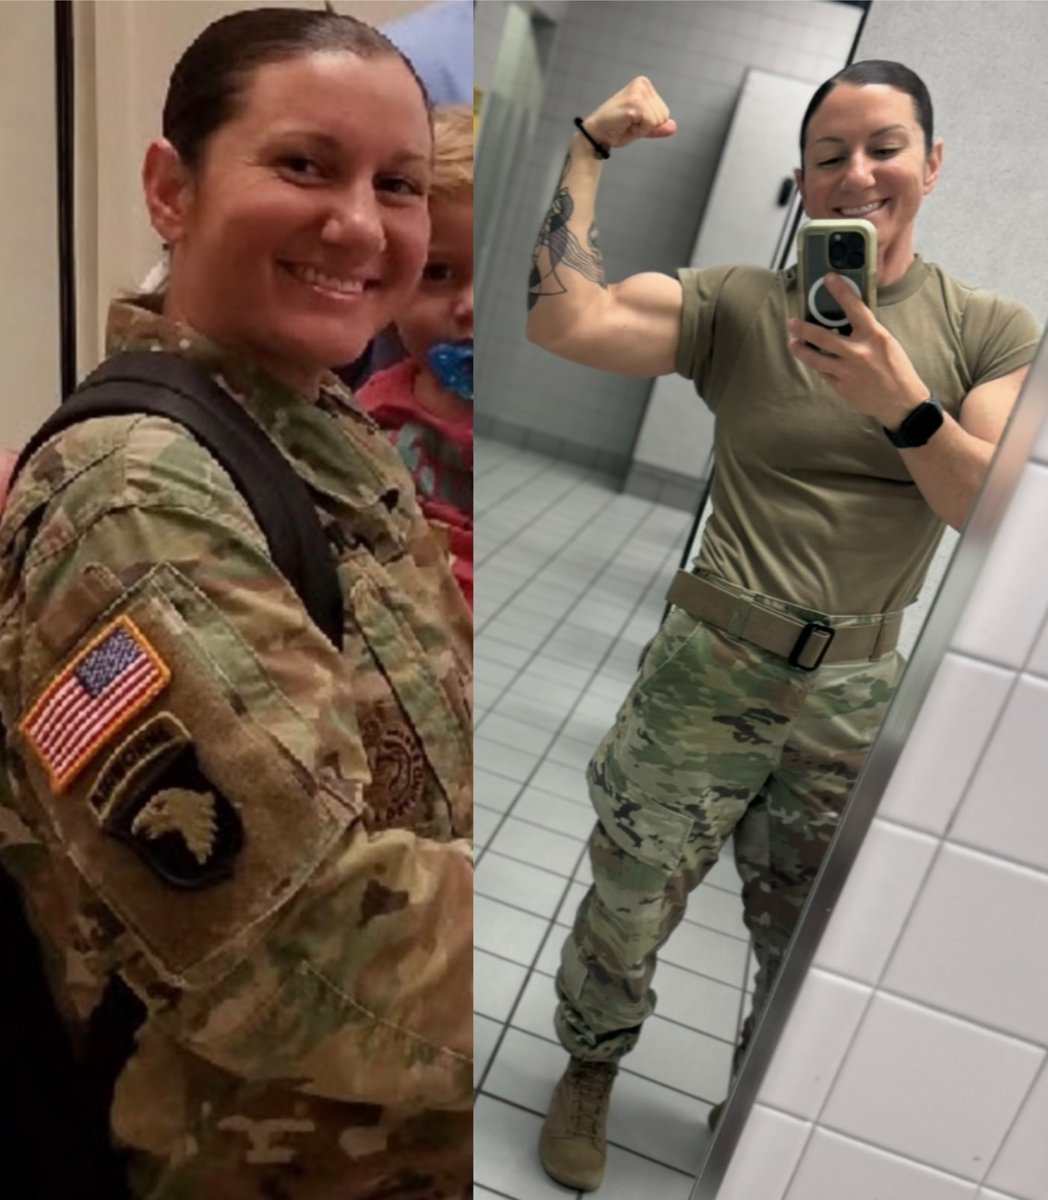 What a journey that I am on! 200 pounds on the left and 125 on the right! The number on the scale doesn’t even matter anymore, but the life that I have added to my life is the true measure! #tbt #morelife #usarmy #usarmysoldier #transformation #enjoytheprocess #journey